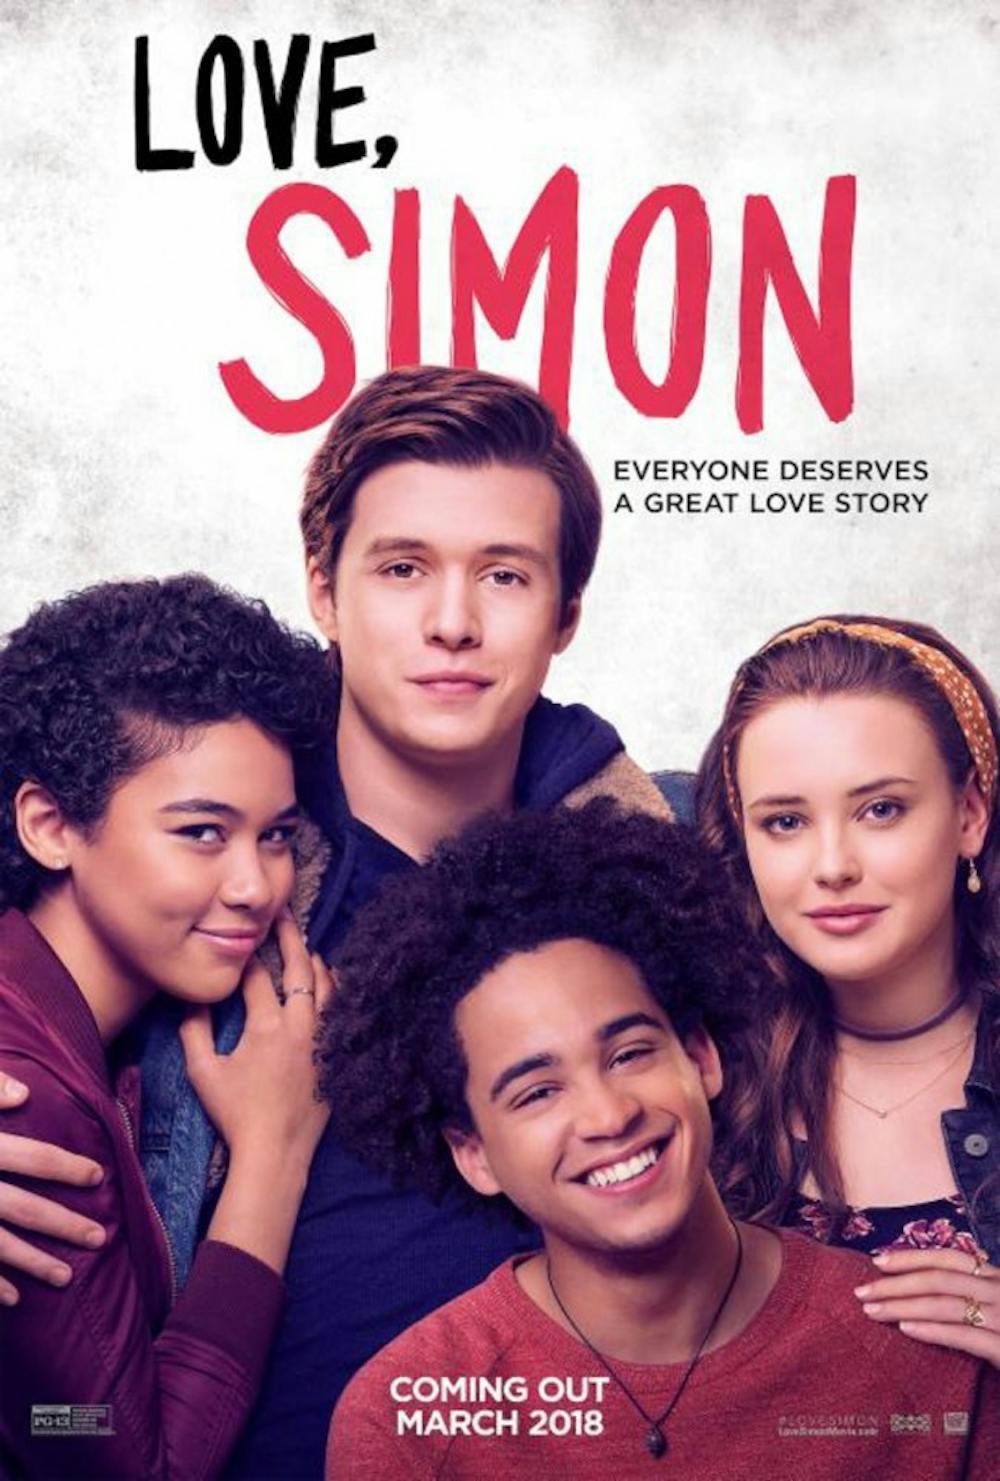 <p>"Love, Simon" stars Nick Robinson as a gay teen struggling to decide whether or not he should keep his sexuality a secret.&nbsp;</p>